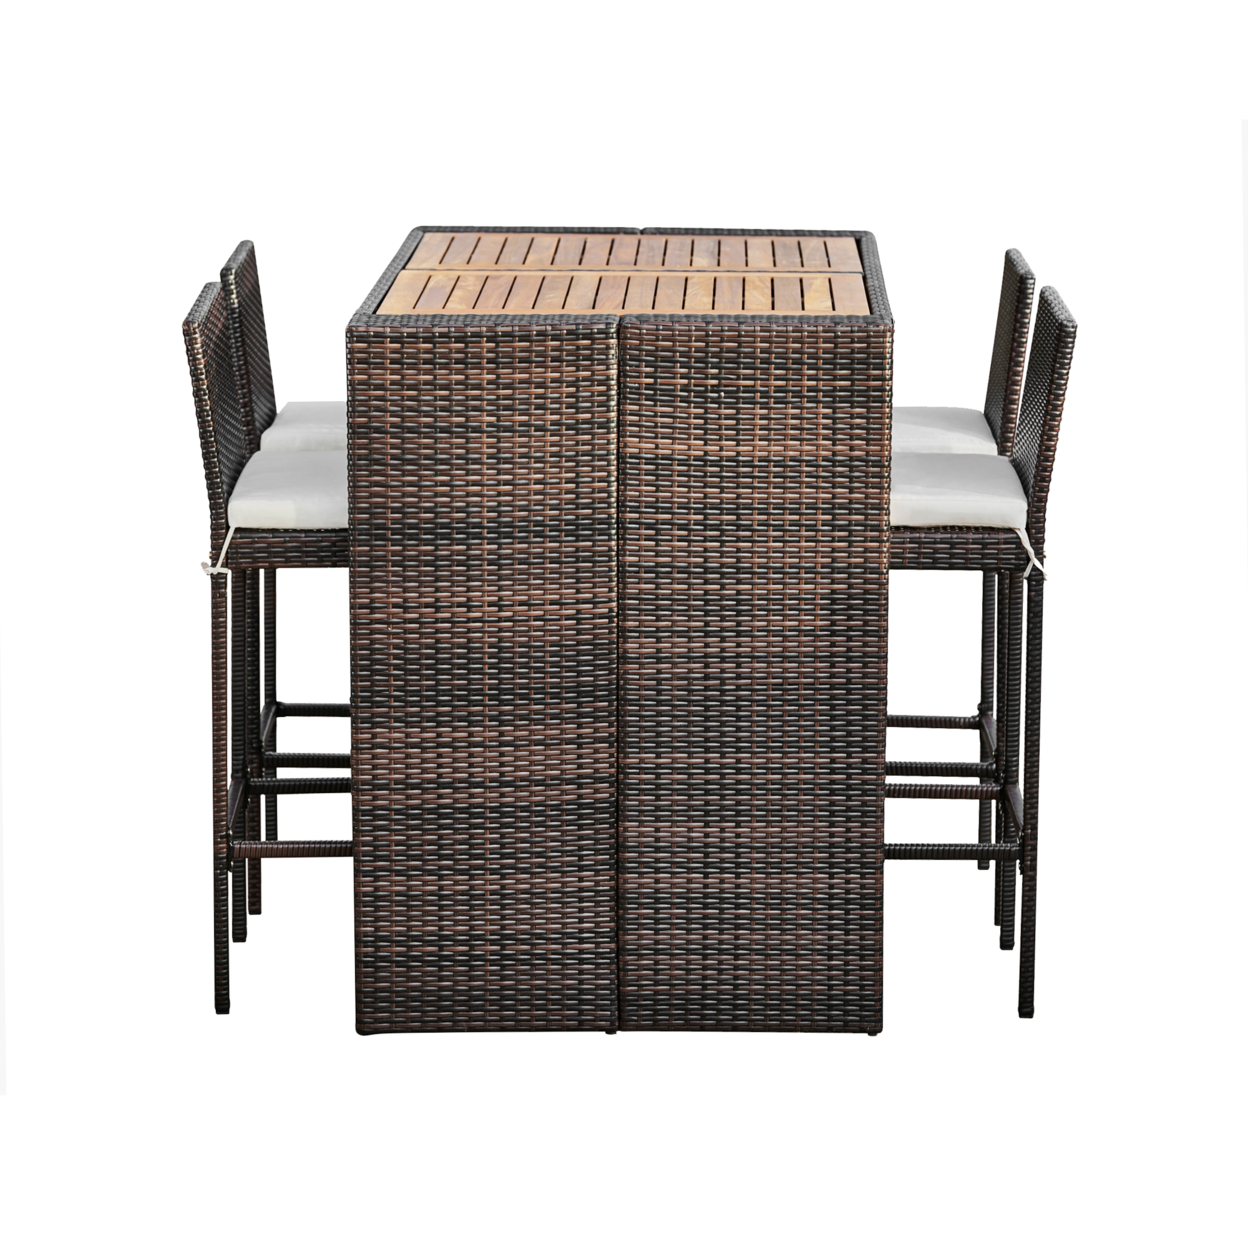 5 Pc Outdoor Wicker Dining Set, Brown